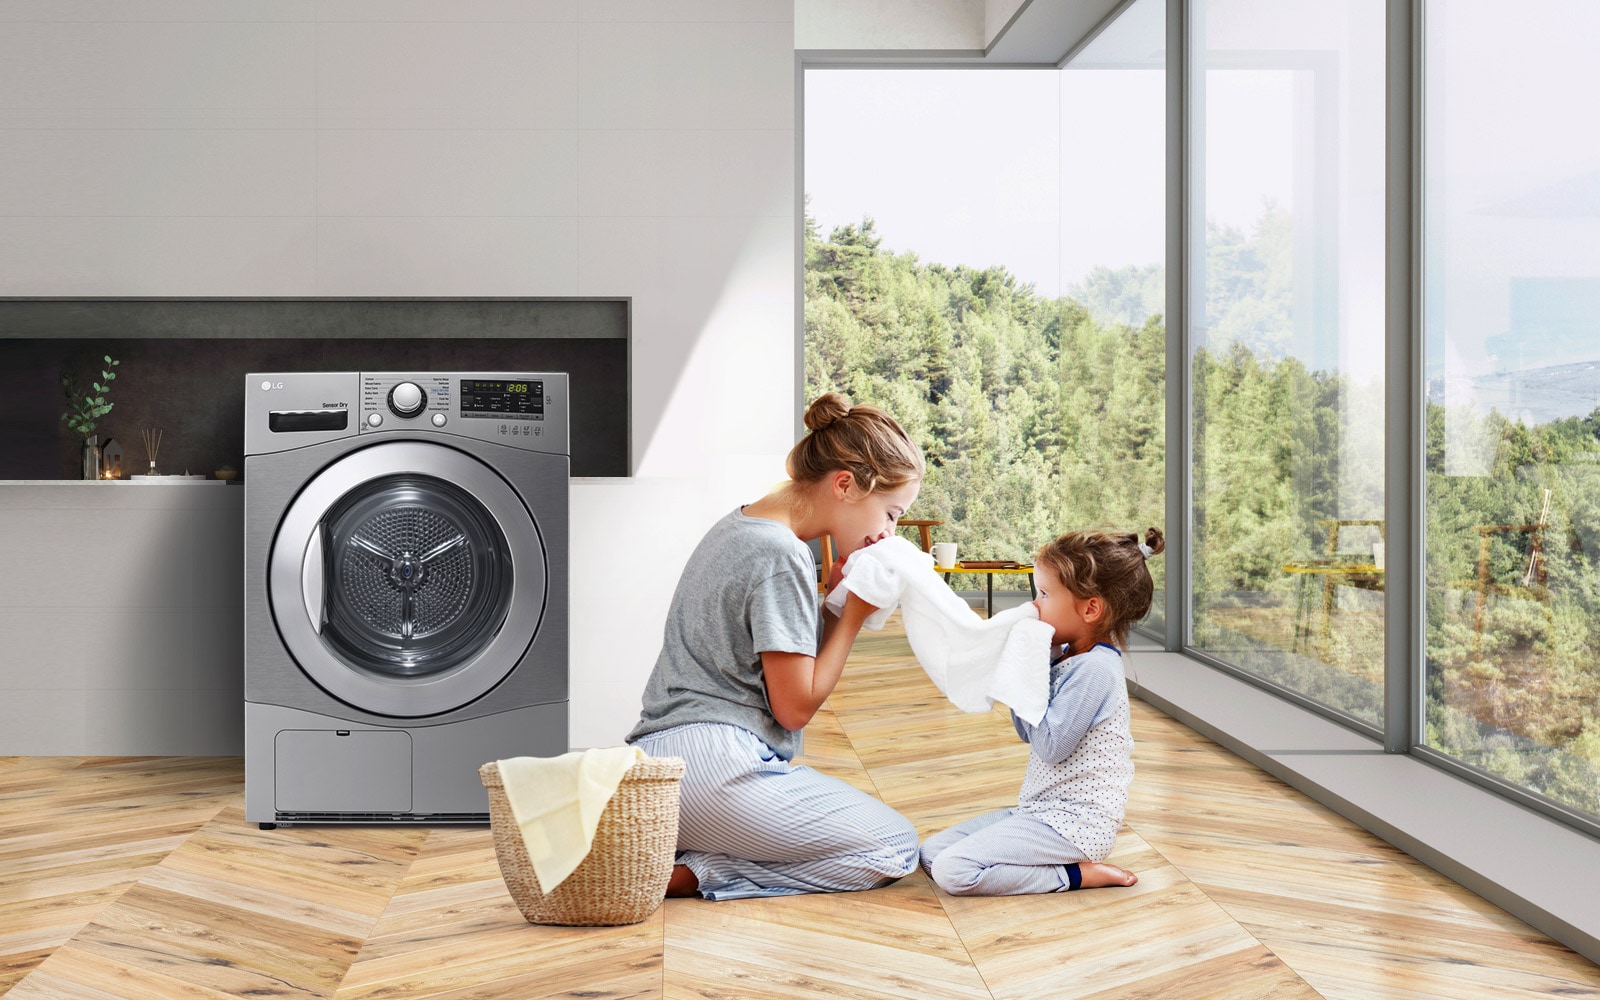 A mother and daughter sit on the floor holding and enjoying the smell of a towel that just came out of the Condensing Type Dryer that sits next to them.